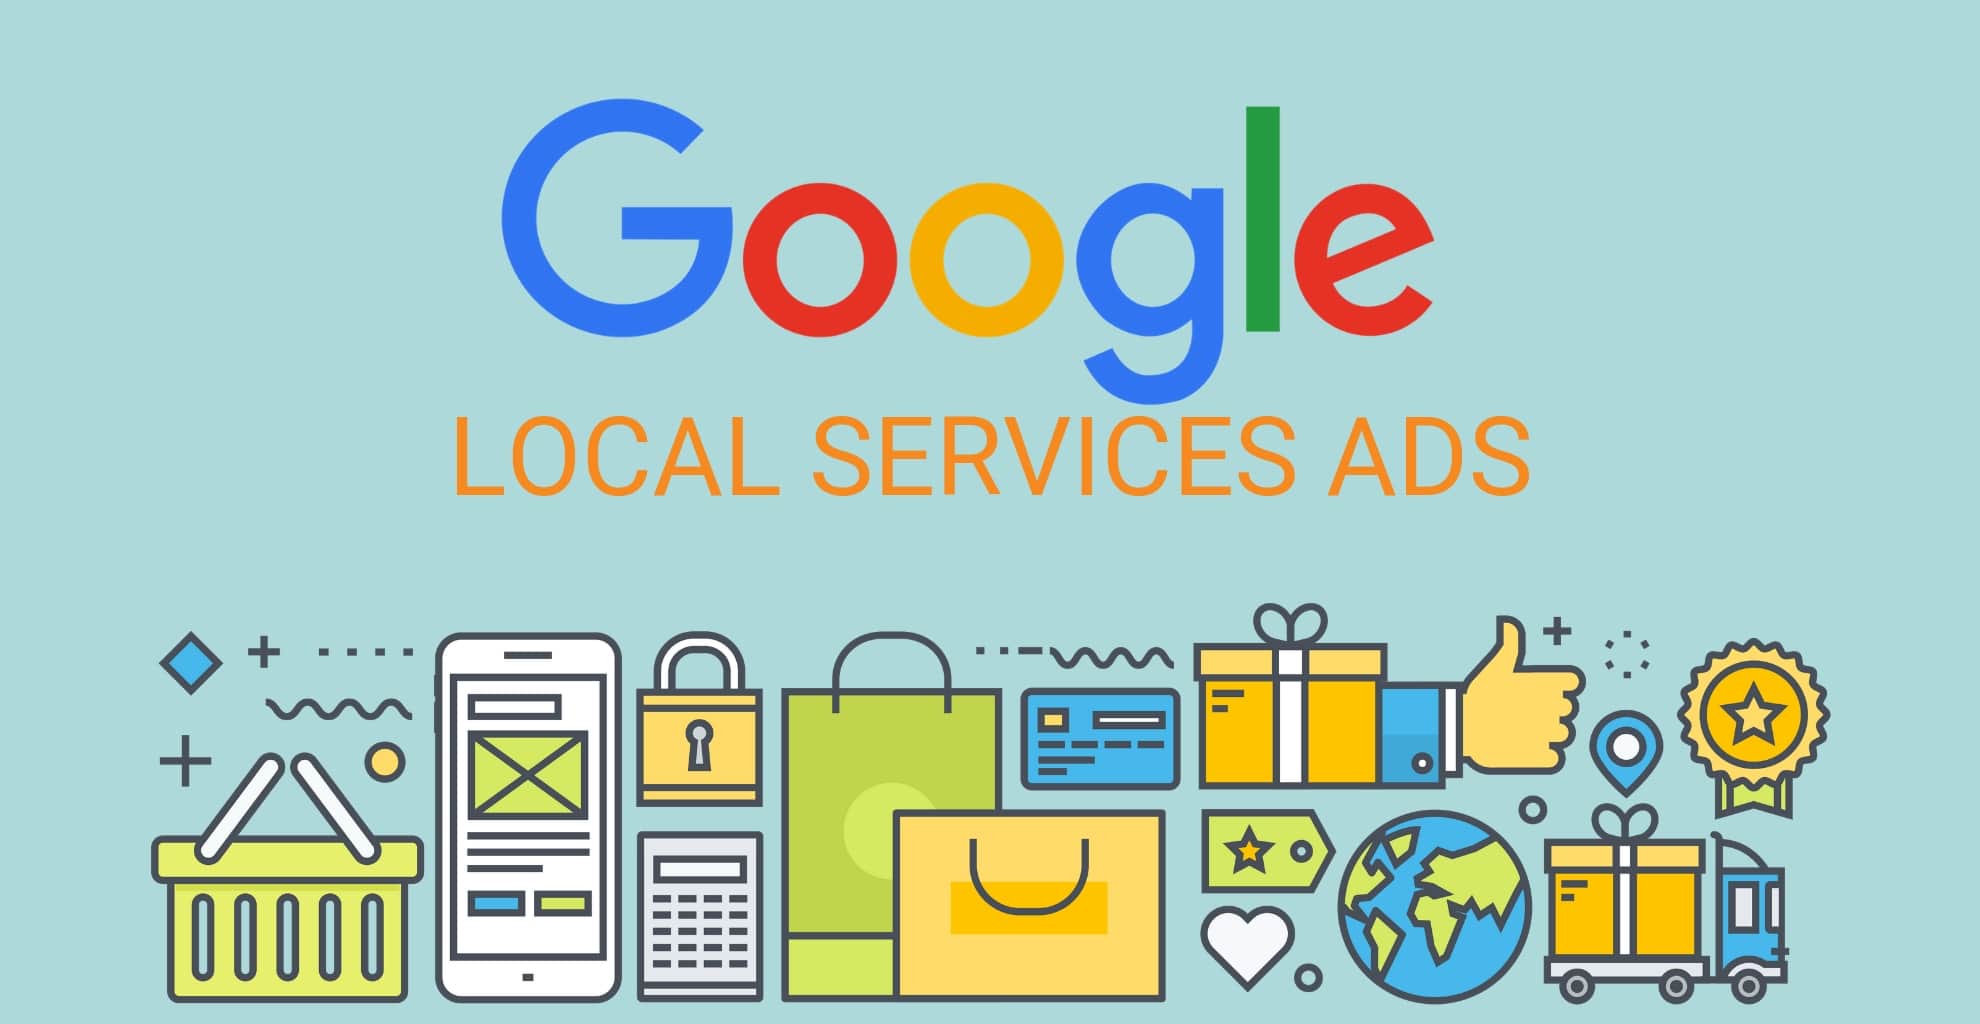 Advertise the company with the help of Google: